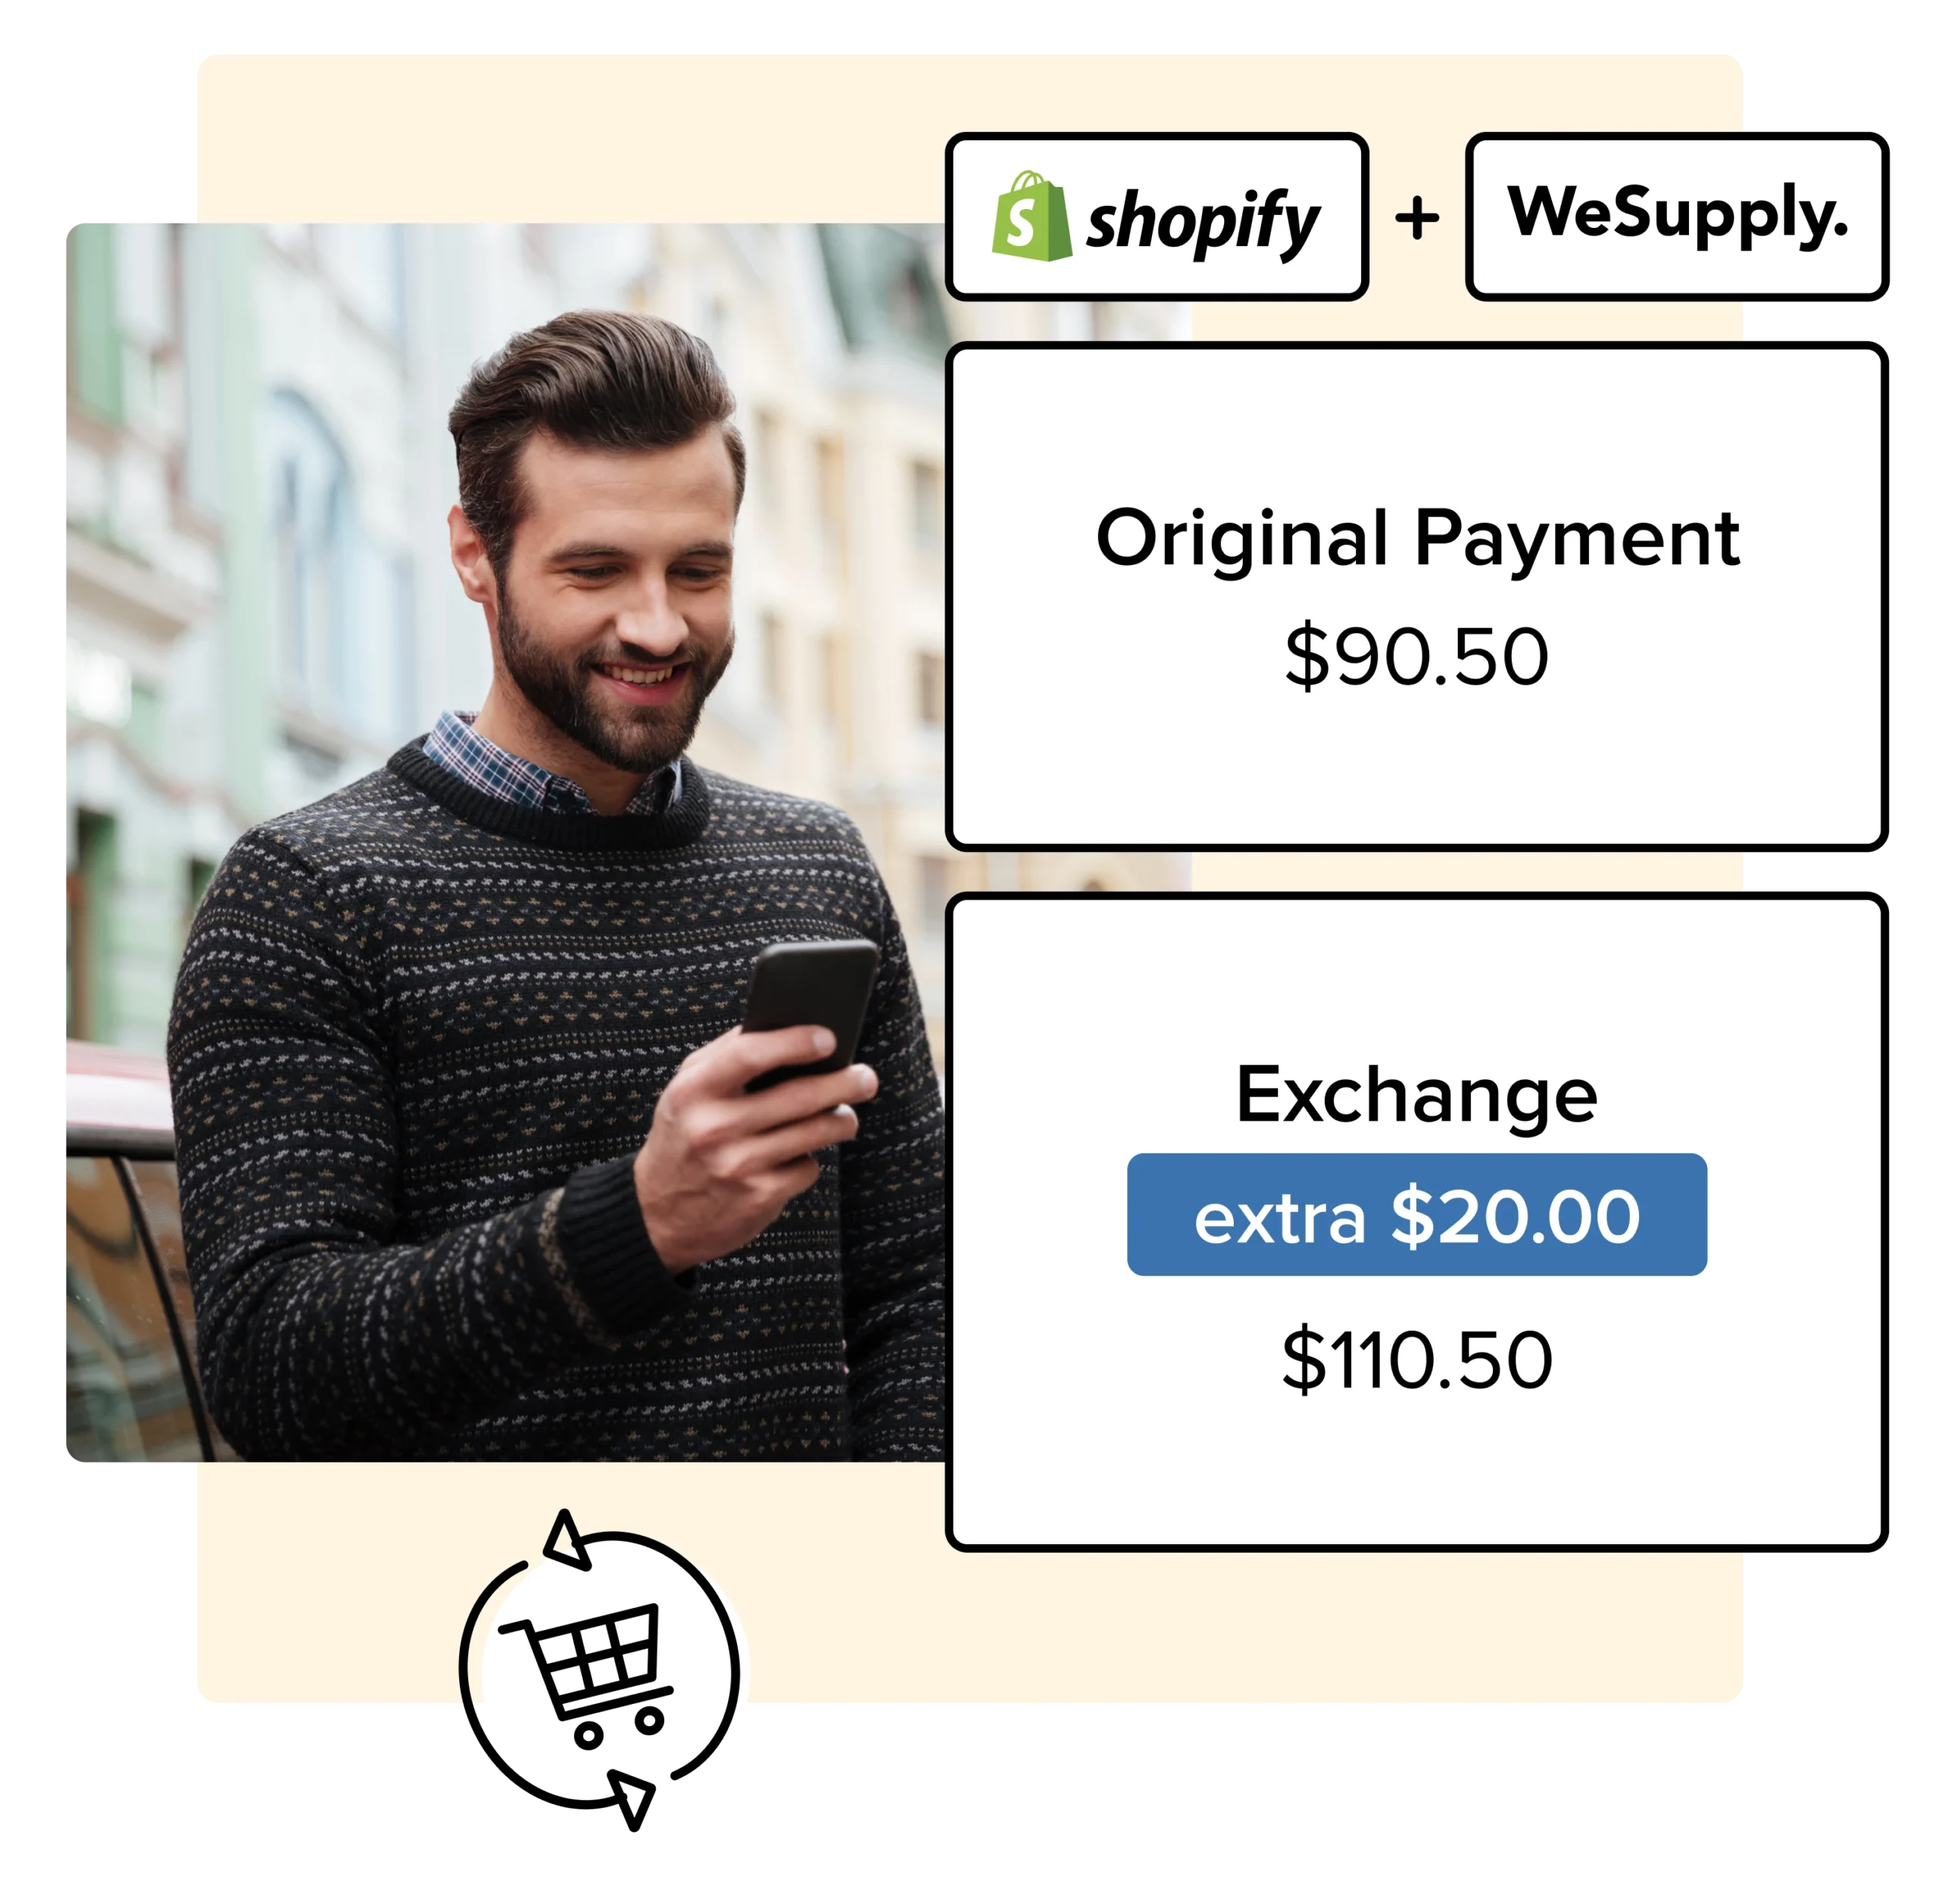 WeSupply instant credit exchanges shopify